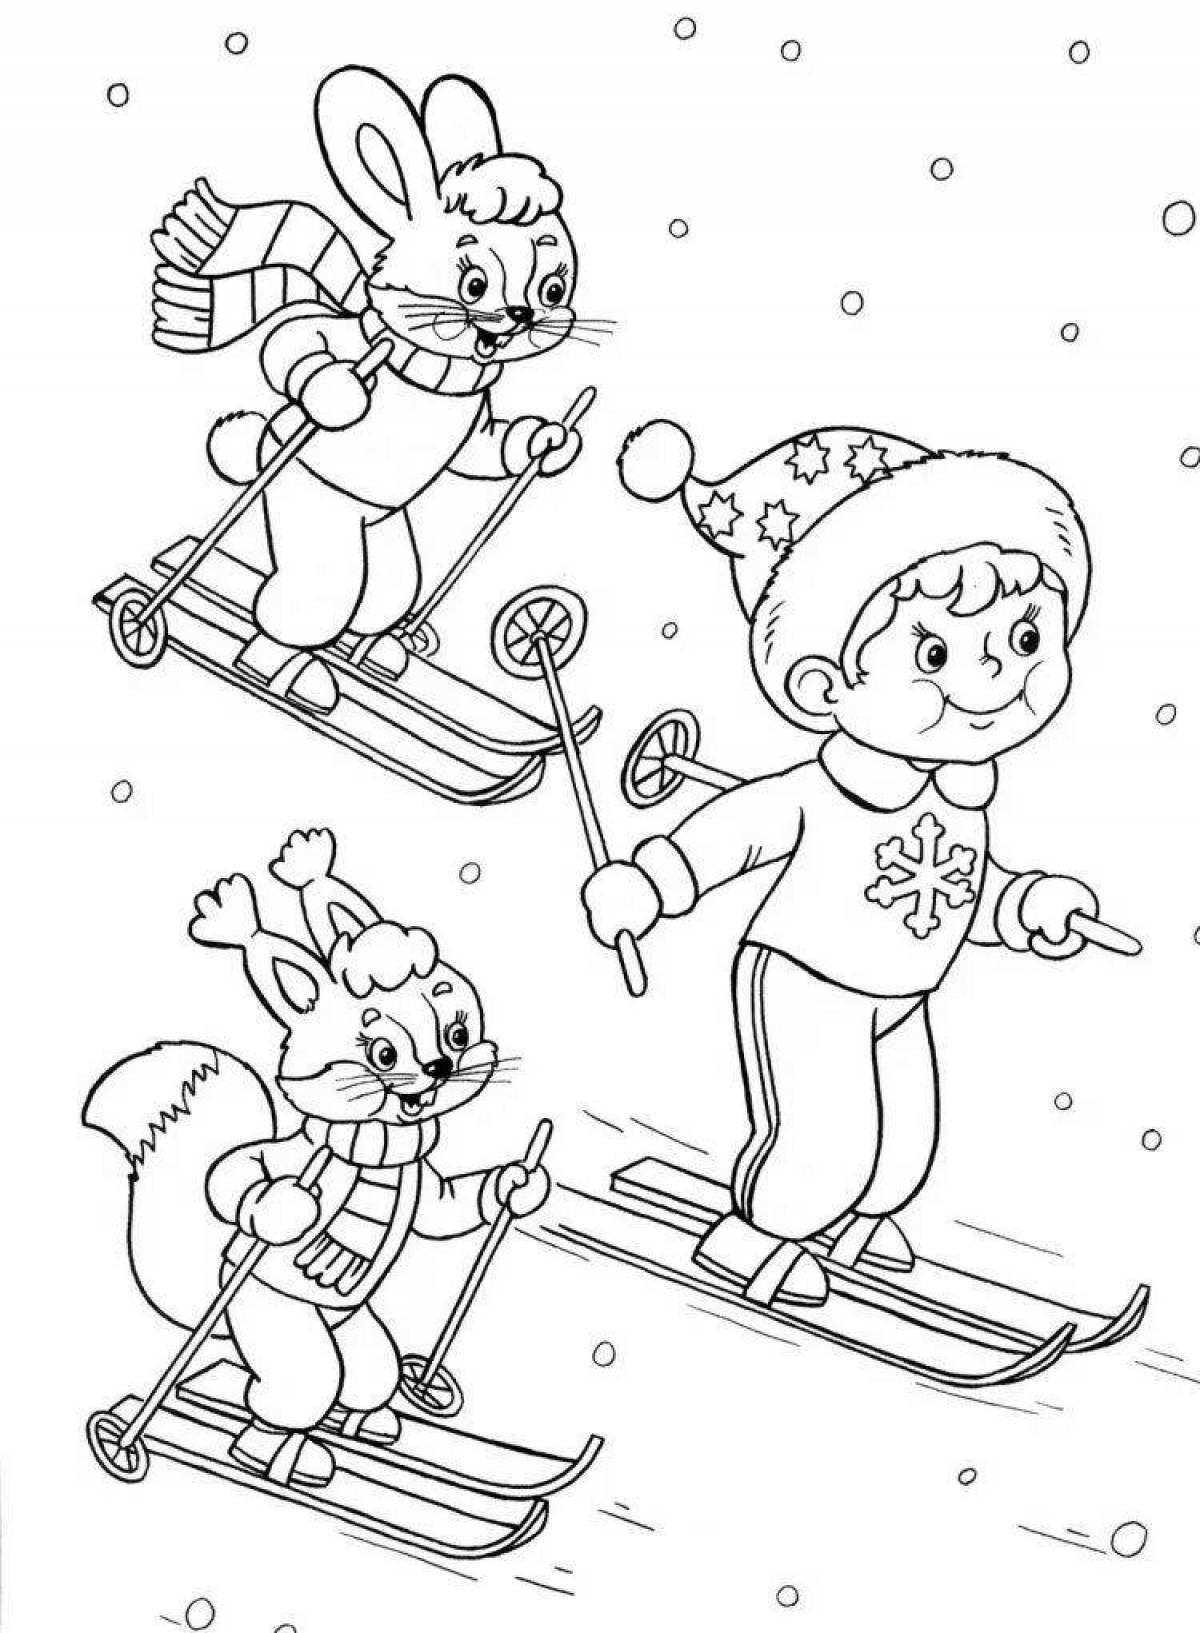 Animated winter sports coloring page